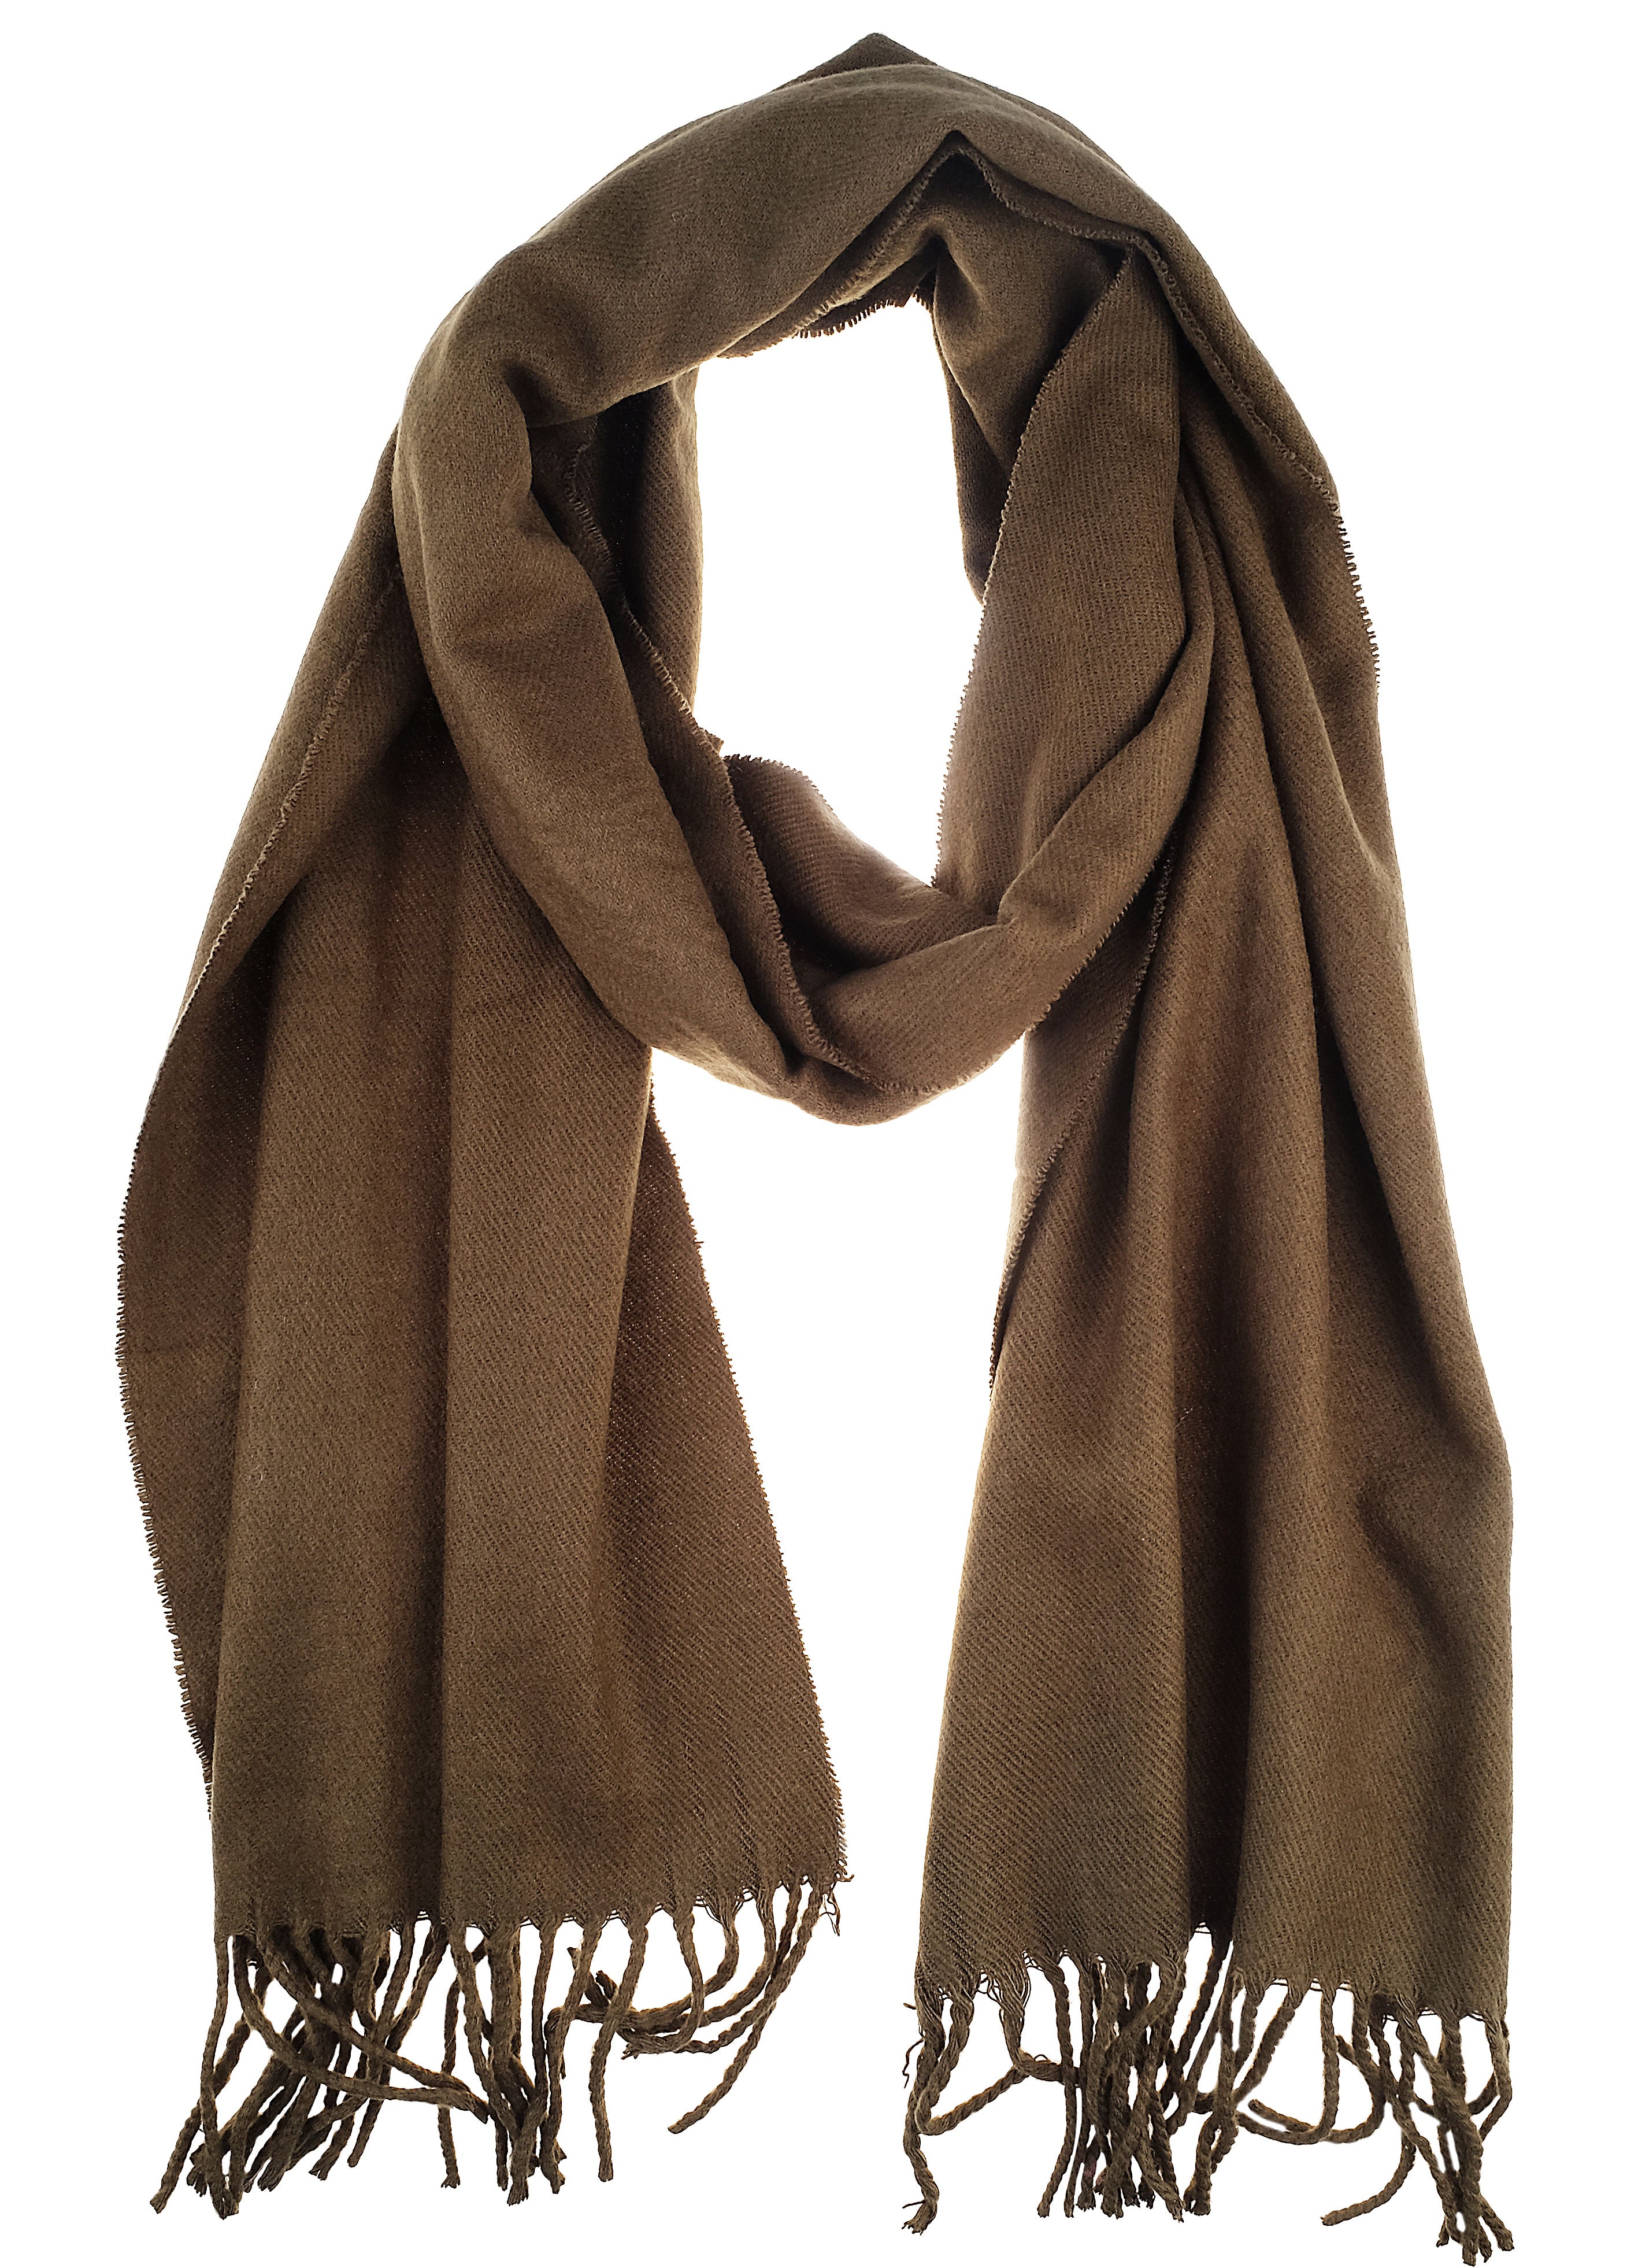 Soft Light Weight Cashmere Scarf 7 colors